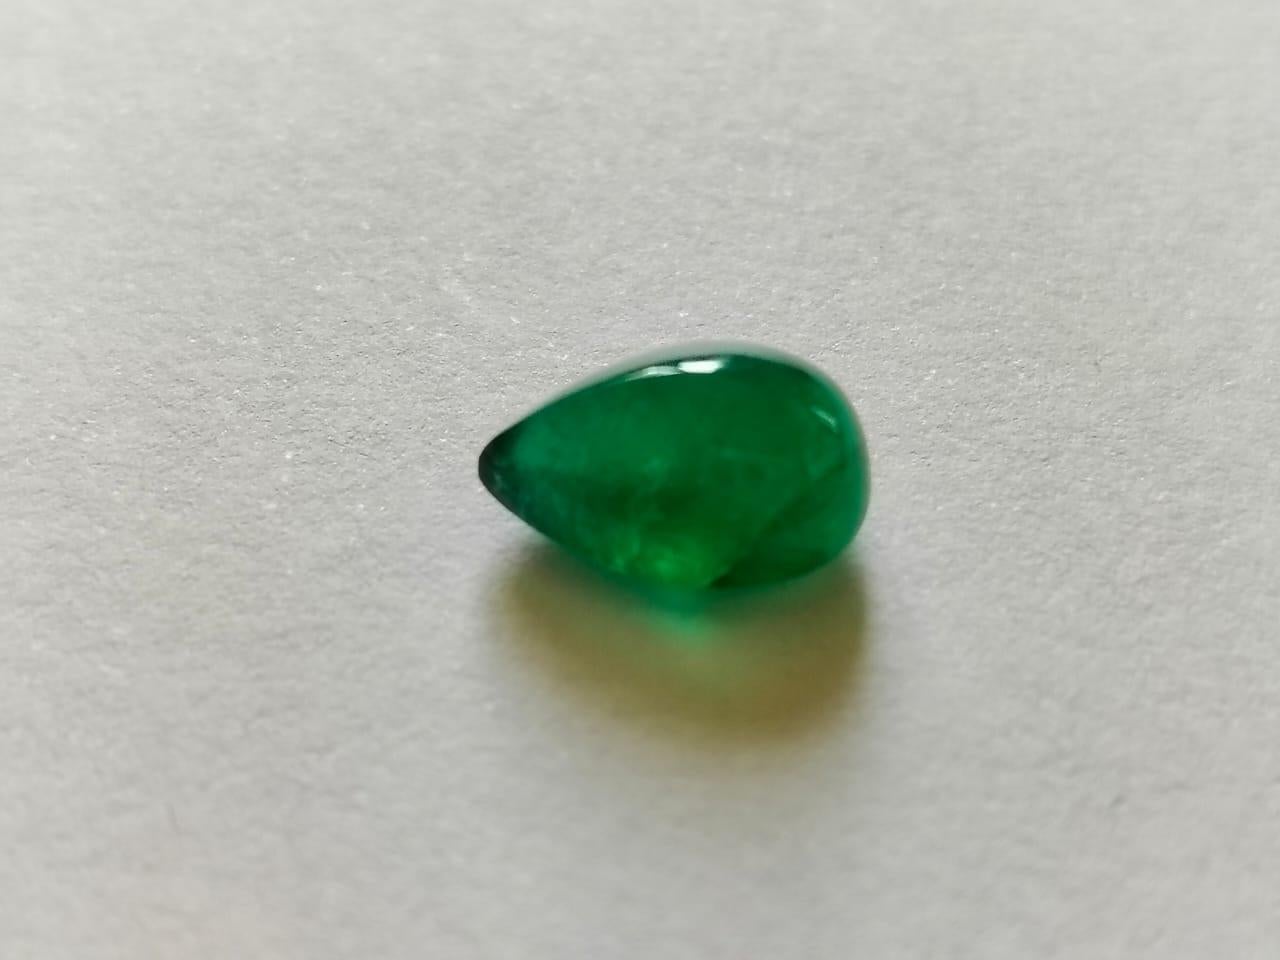 A Very Beautiful Zambia Emerald Pear Cabochon Loose Gemstone.
4.39 Carat with a elegant Green color and excellent clarity. Also has an great look with ideal polish to show great shine and color . It will look extraordinary in jewelry. The dimensions